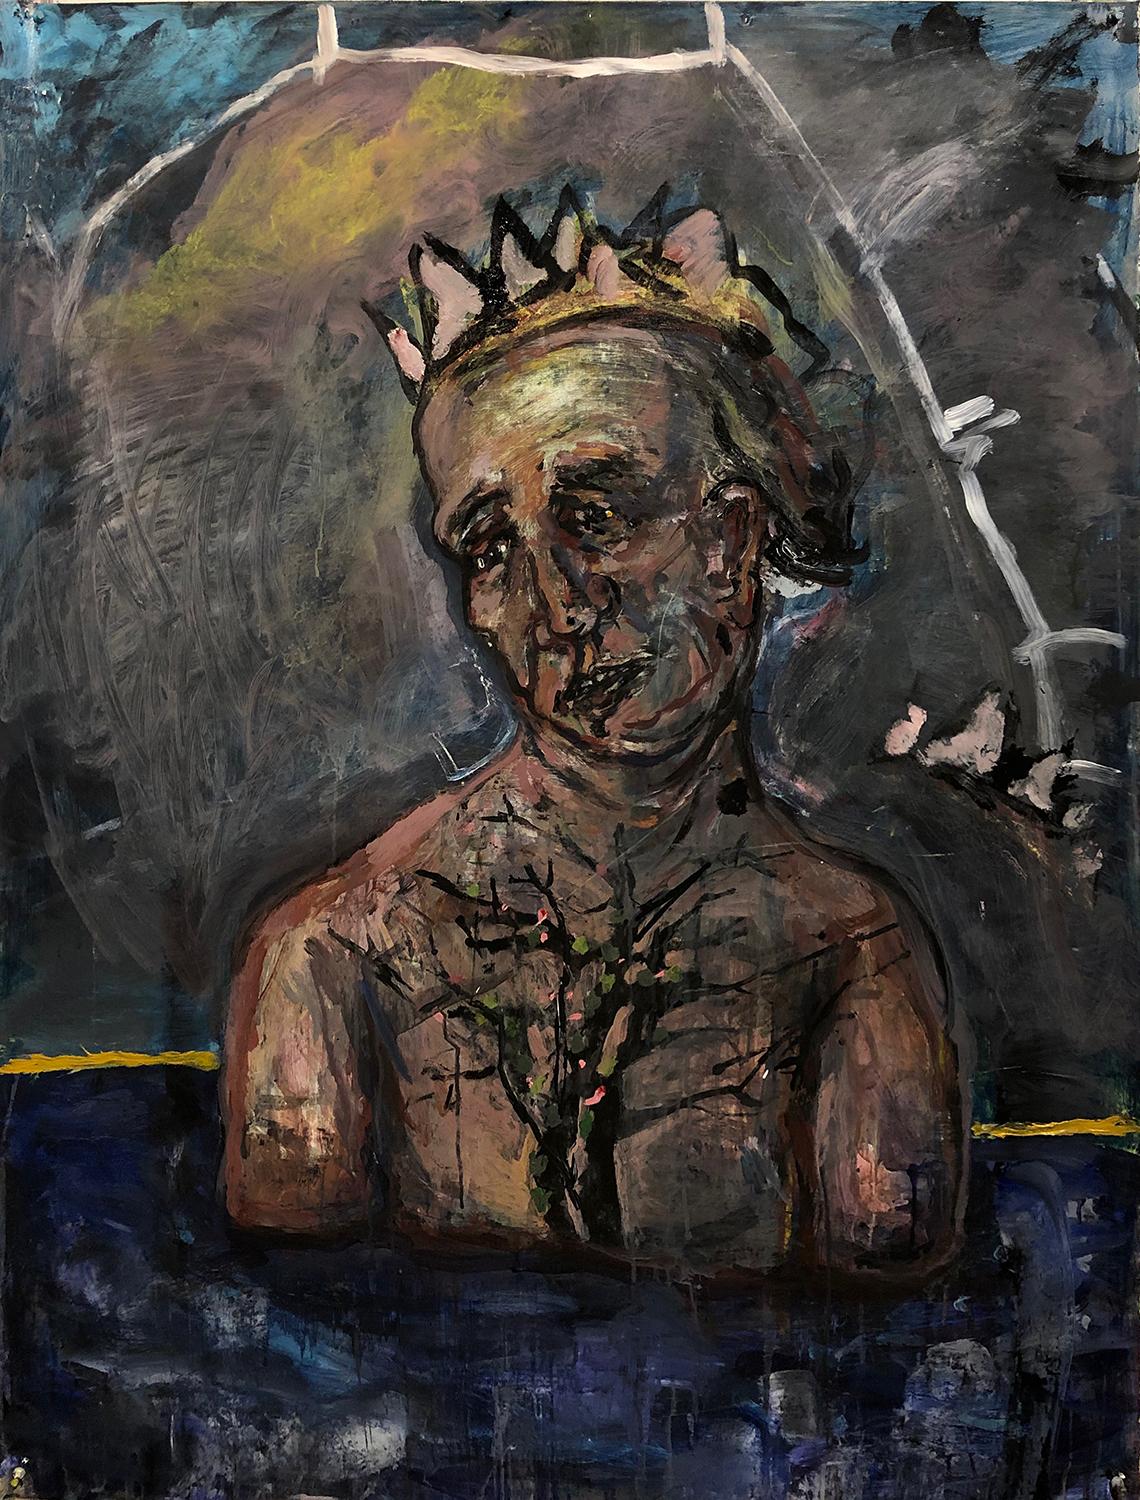 Dale Williams Figurative Painting - "Man Wearing Crown in Water", acrylic, paper, myth, loss, humanity, surrealist